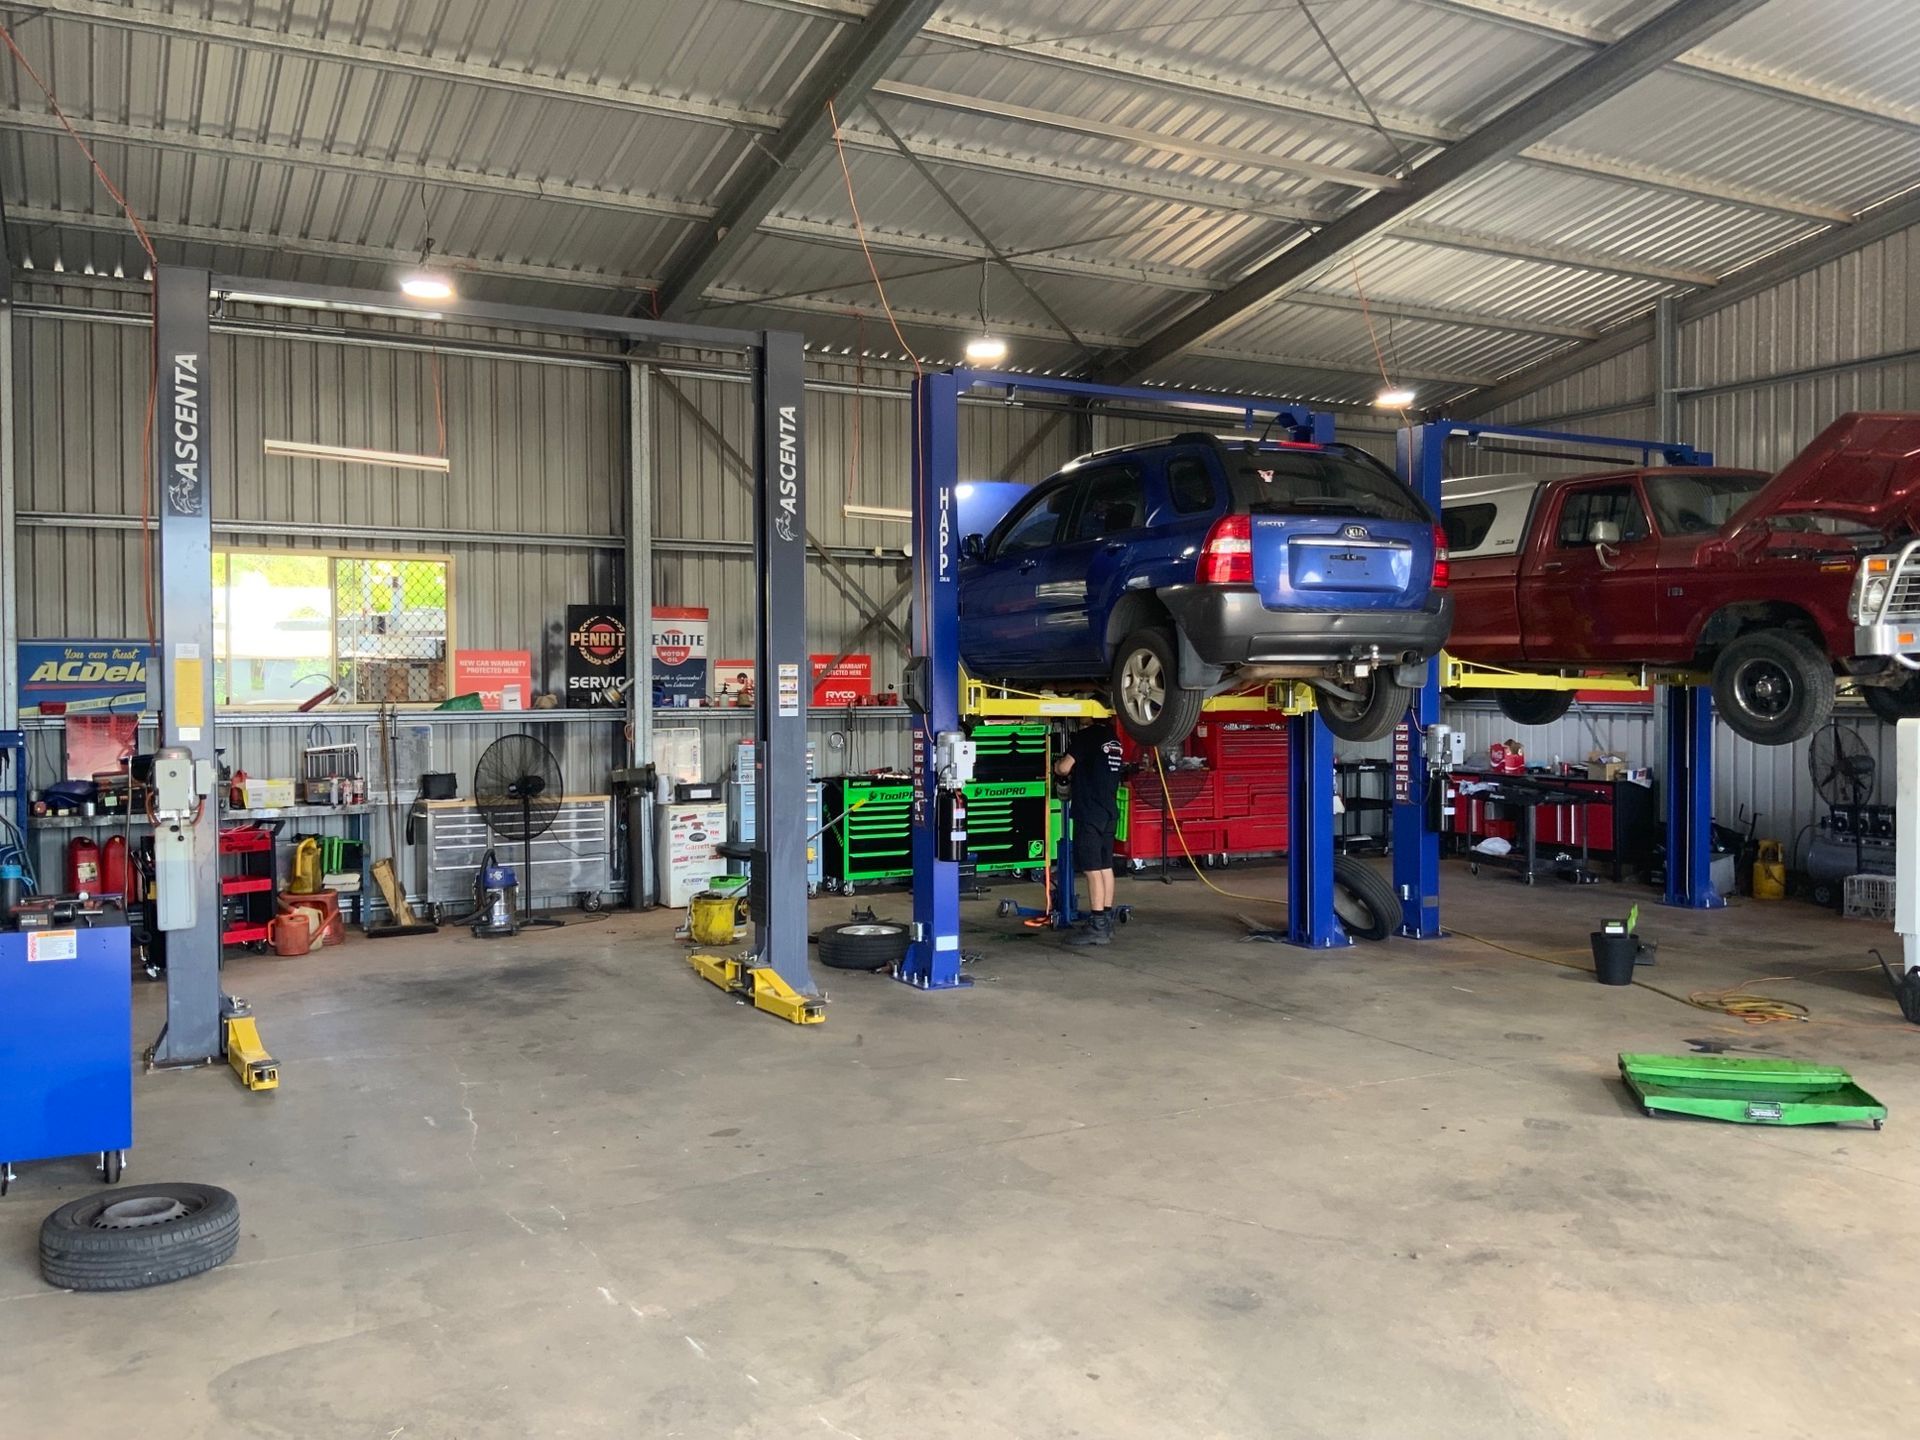 Cars — Mechanical Services in Toowoomba, QLD